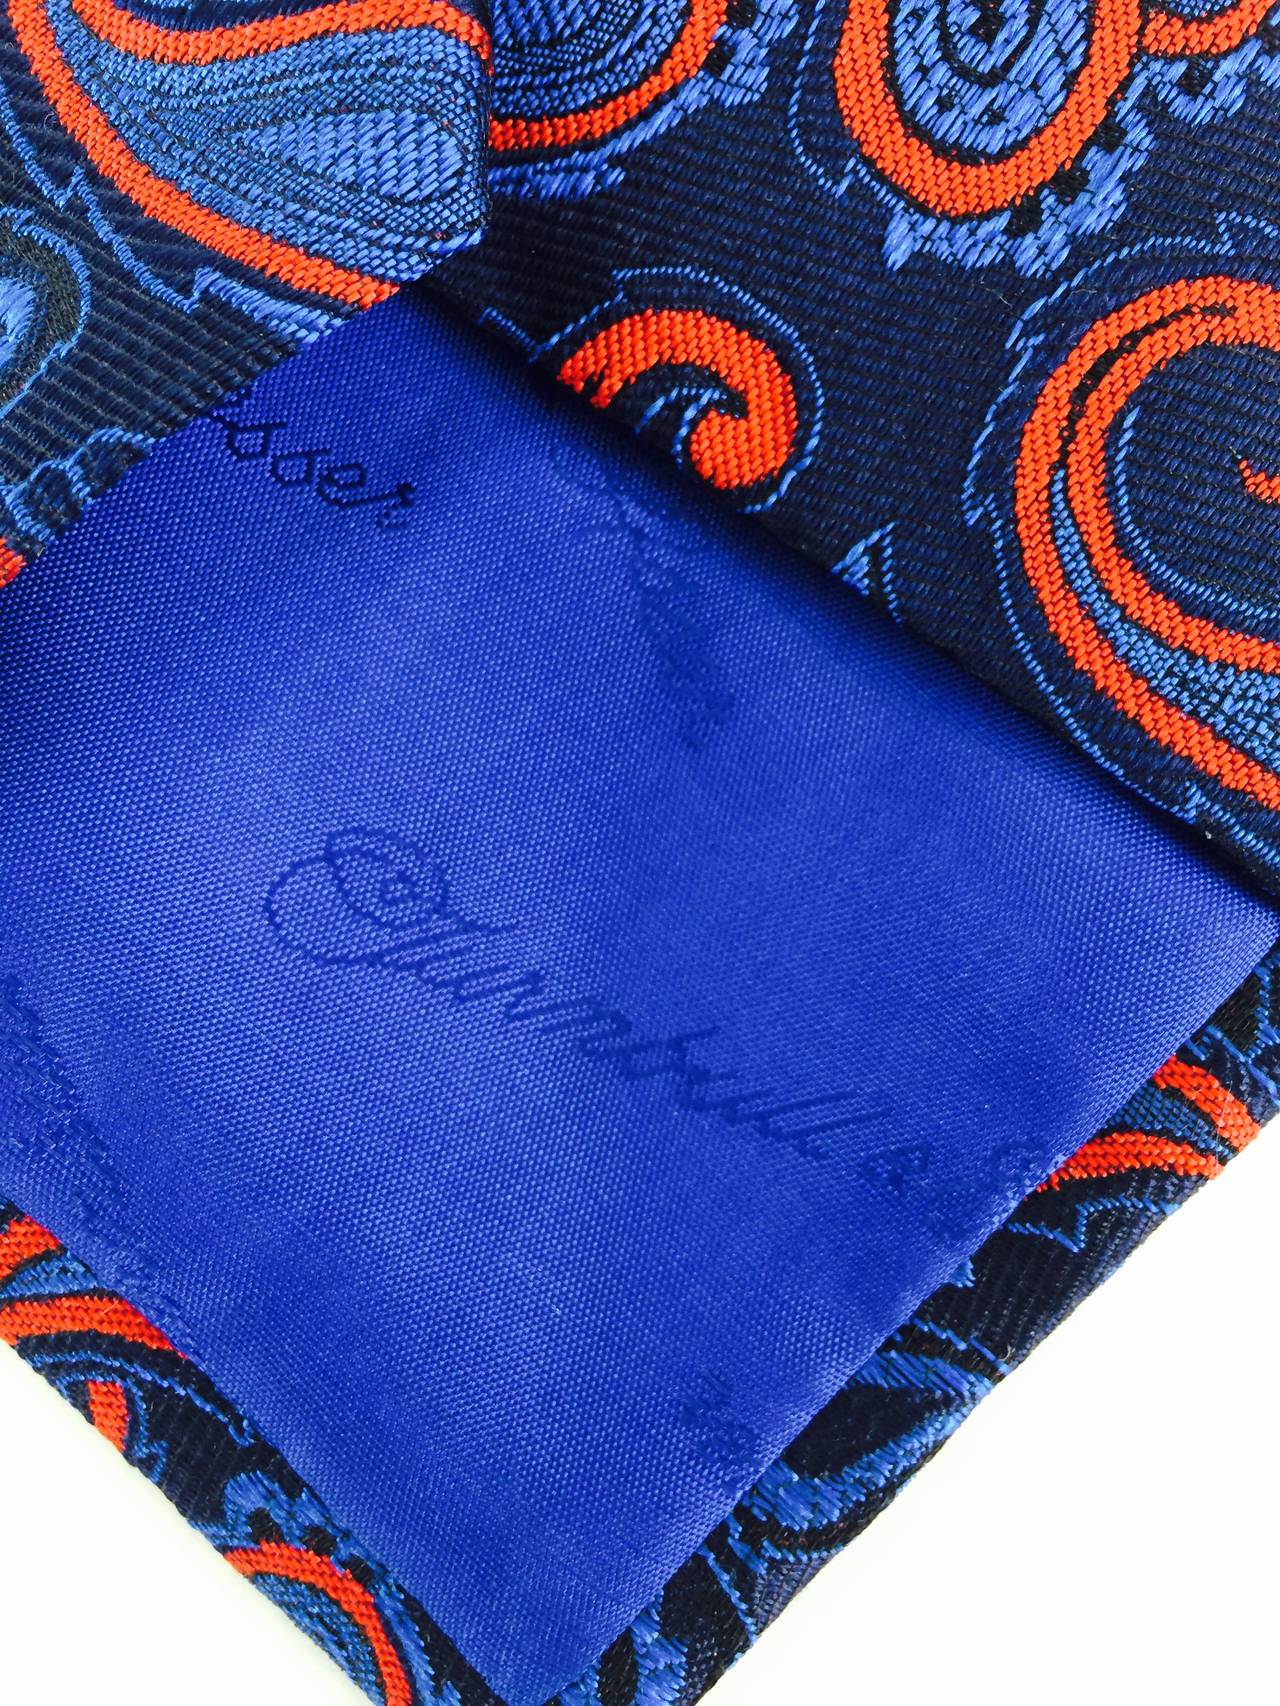 Turnbull & Asser navy blue & red paisley silk twill tie In Excellent Condition In West Palm Beach, FL